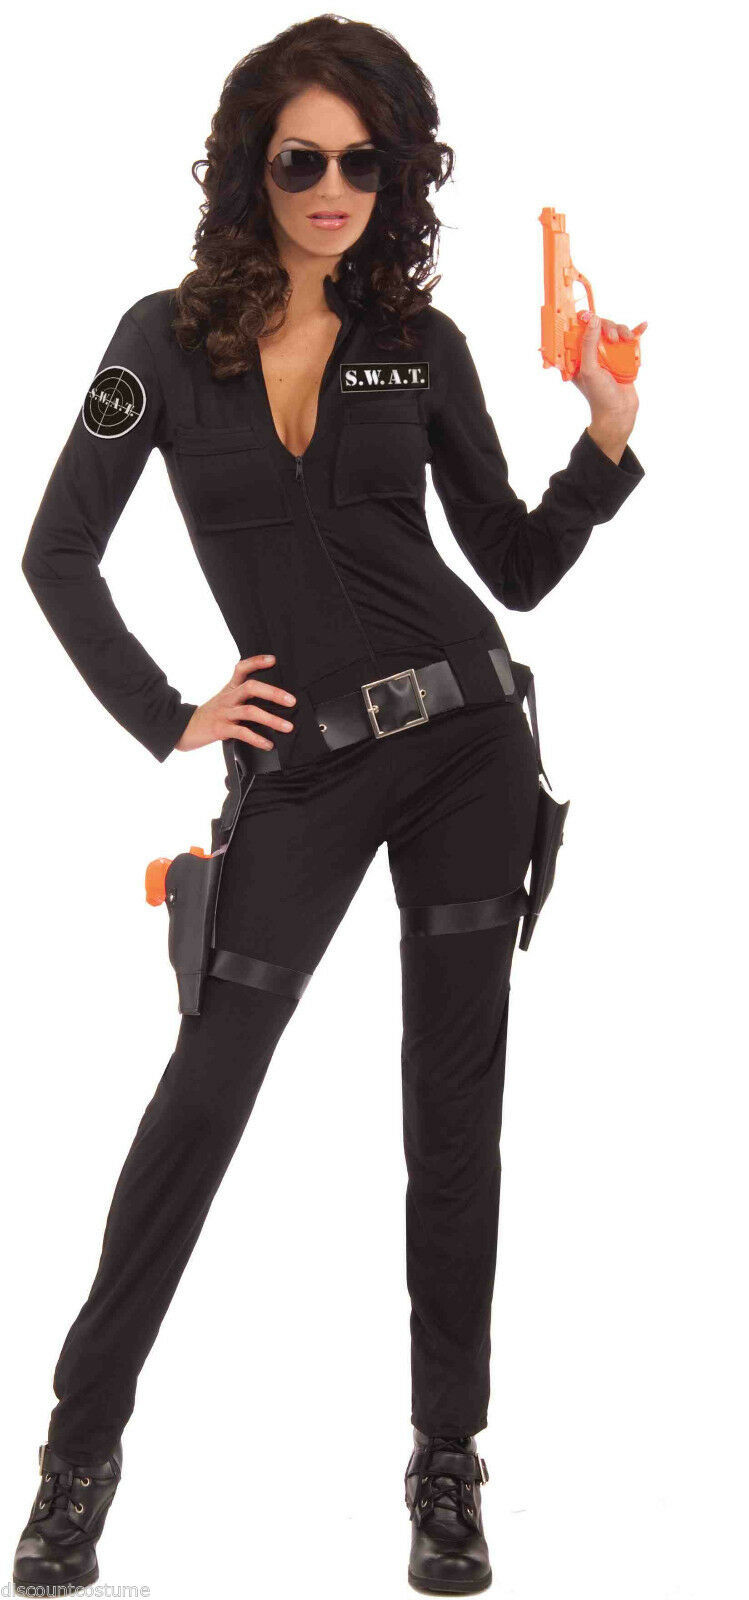 FORUM S.W.A.T. SEXY WOMEN OF ACTION TEAM SWAT POLICE COSTUME ADULT XS ...